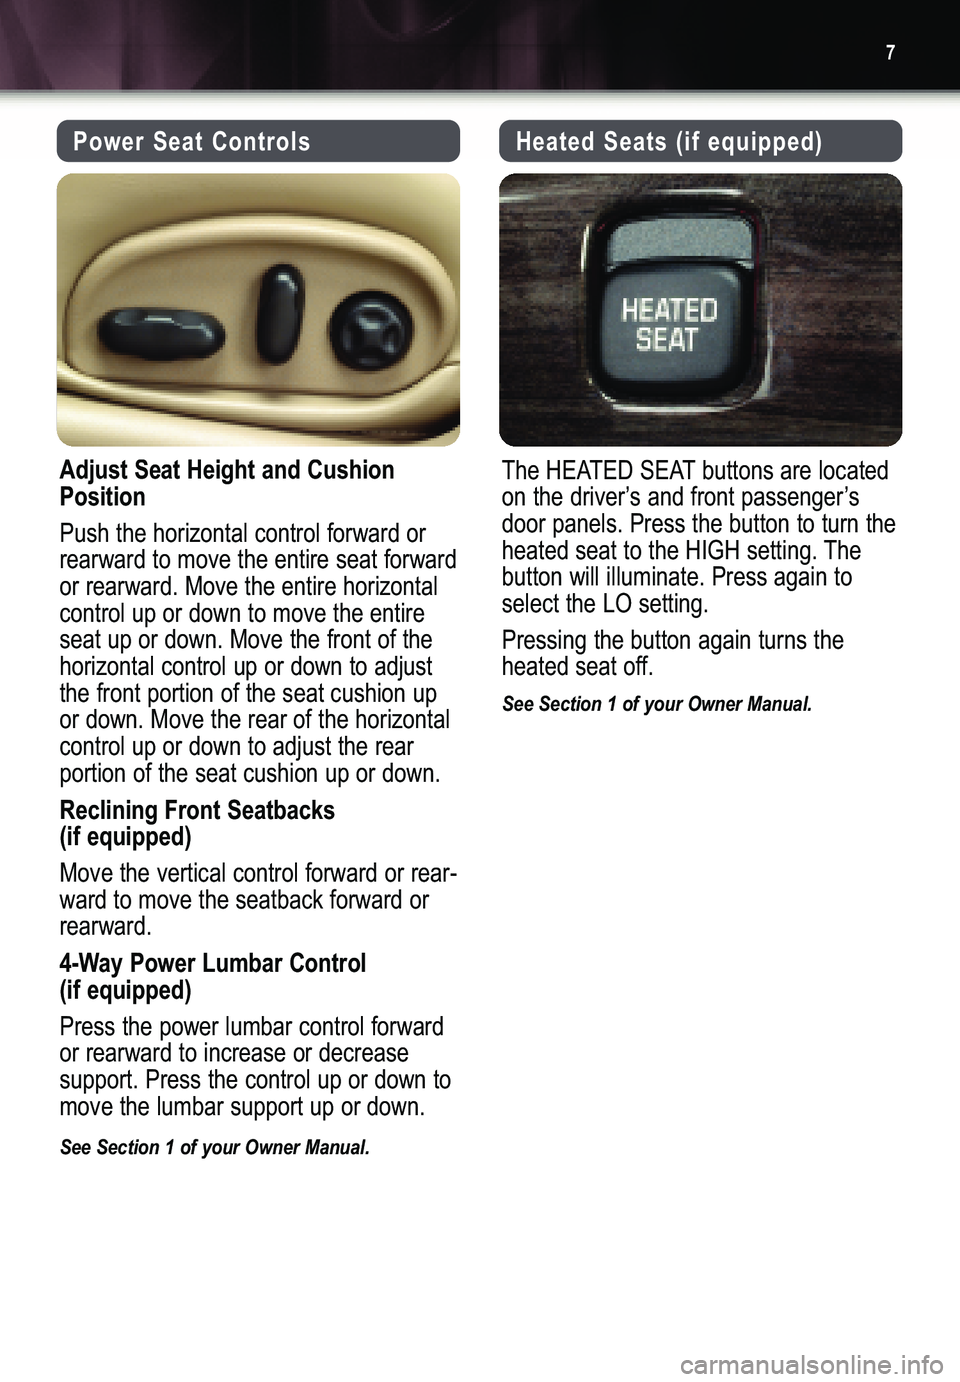 BUICK LESABRE 2005  Get To Know Guide 7
Power Seat Controls
Adjust Seat Height and Cushion
Position
Push the horizontal control forward or
rearward to move the entire seat forwardor rearward. Move the entire horizontalcontrol up or down t